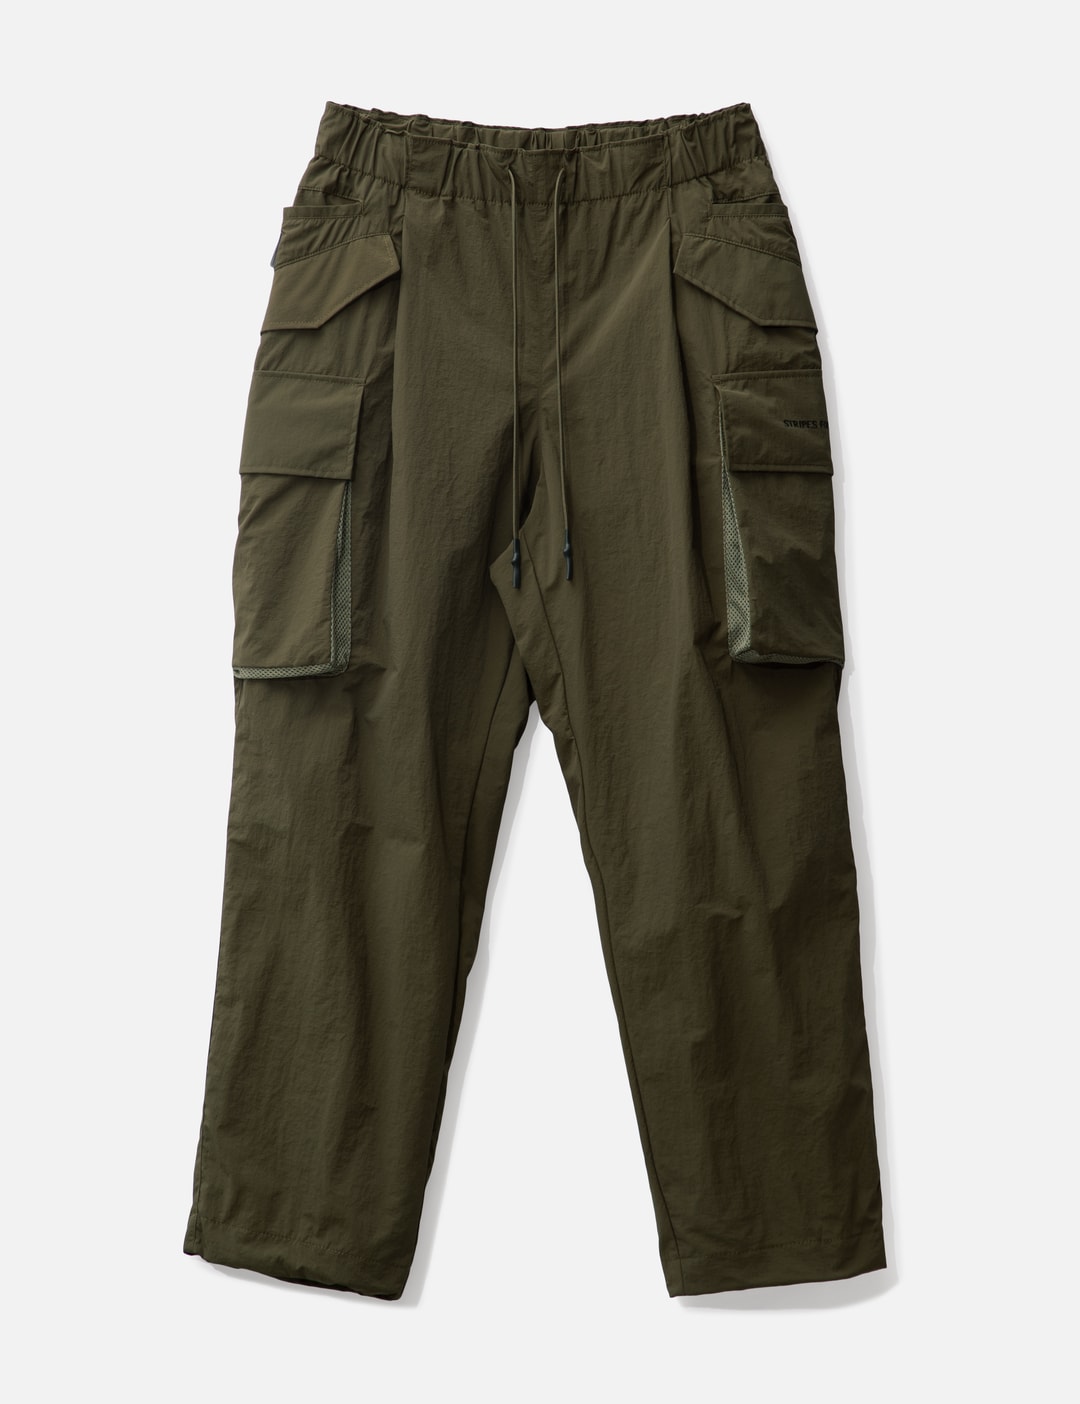 Stripes For Creative - Wide Cargo Pants | HBX - Globally Curated ...